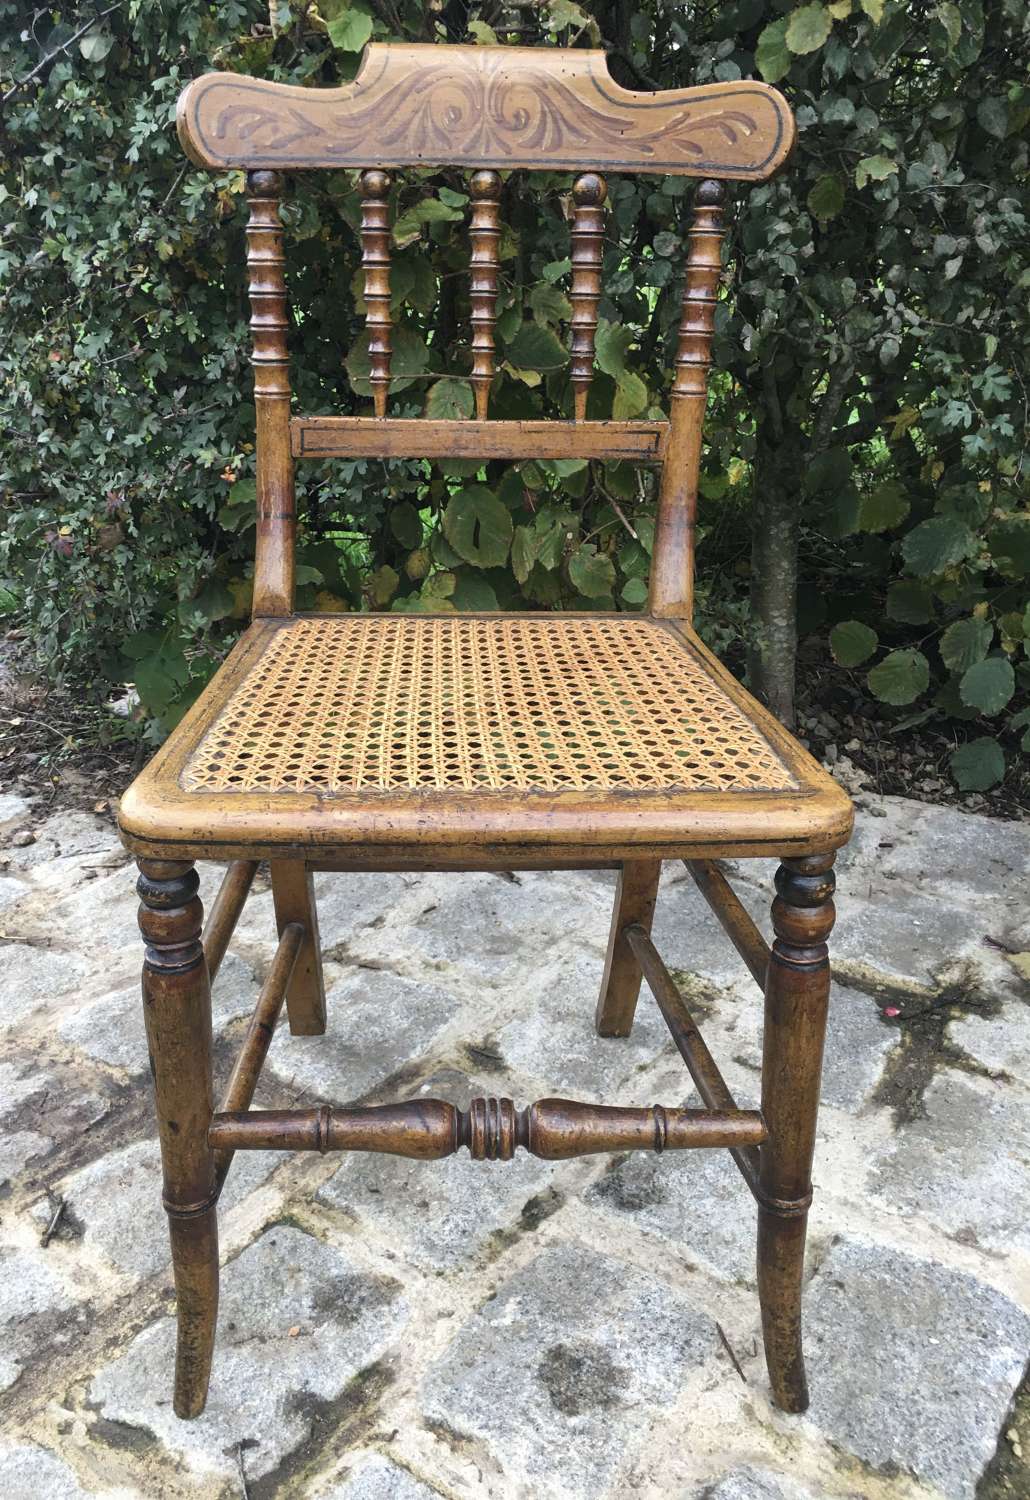 EARLY 19TH CENTURY ORIGINAL PAINTED CHAIR.